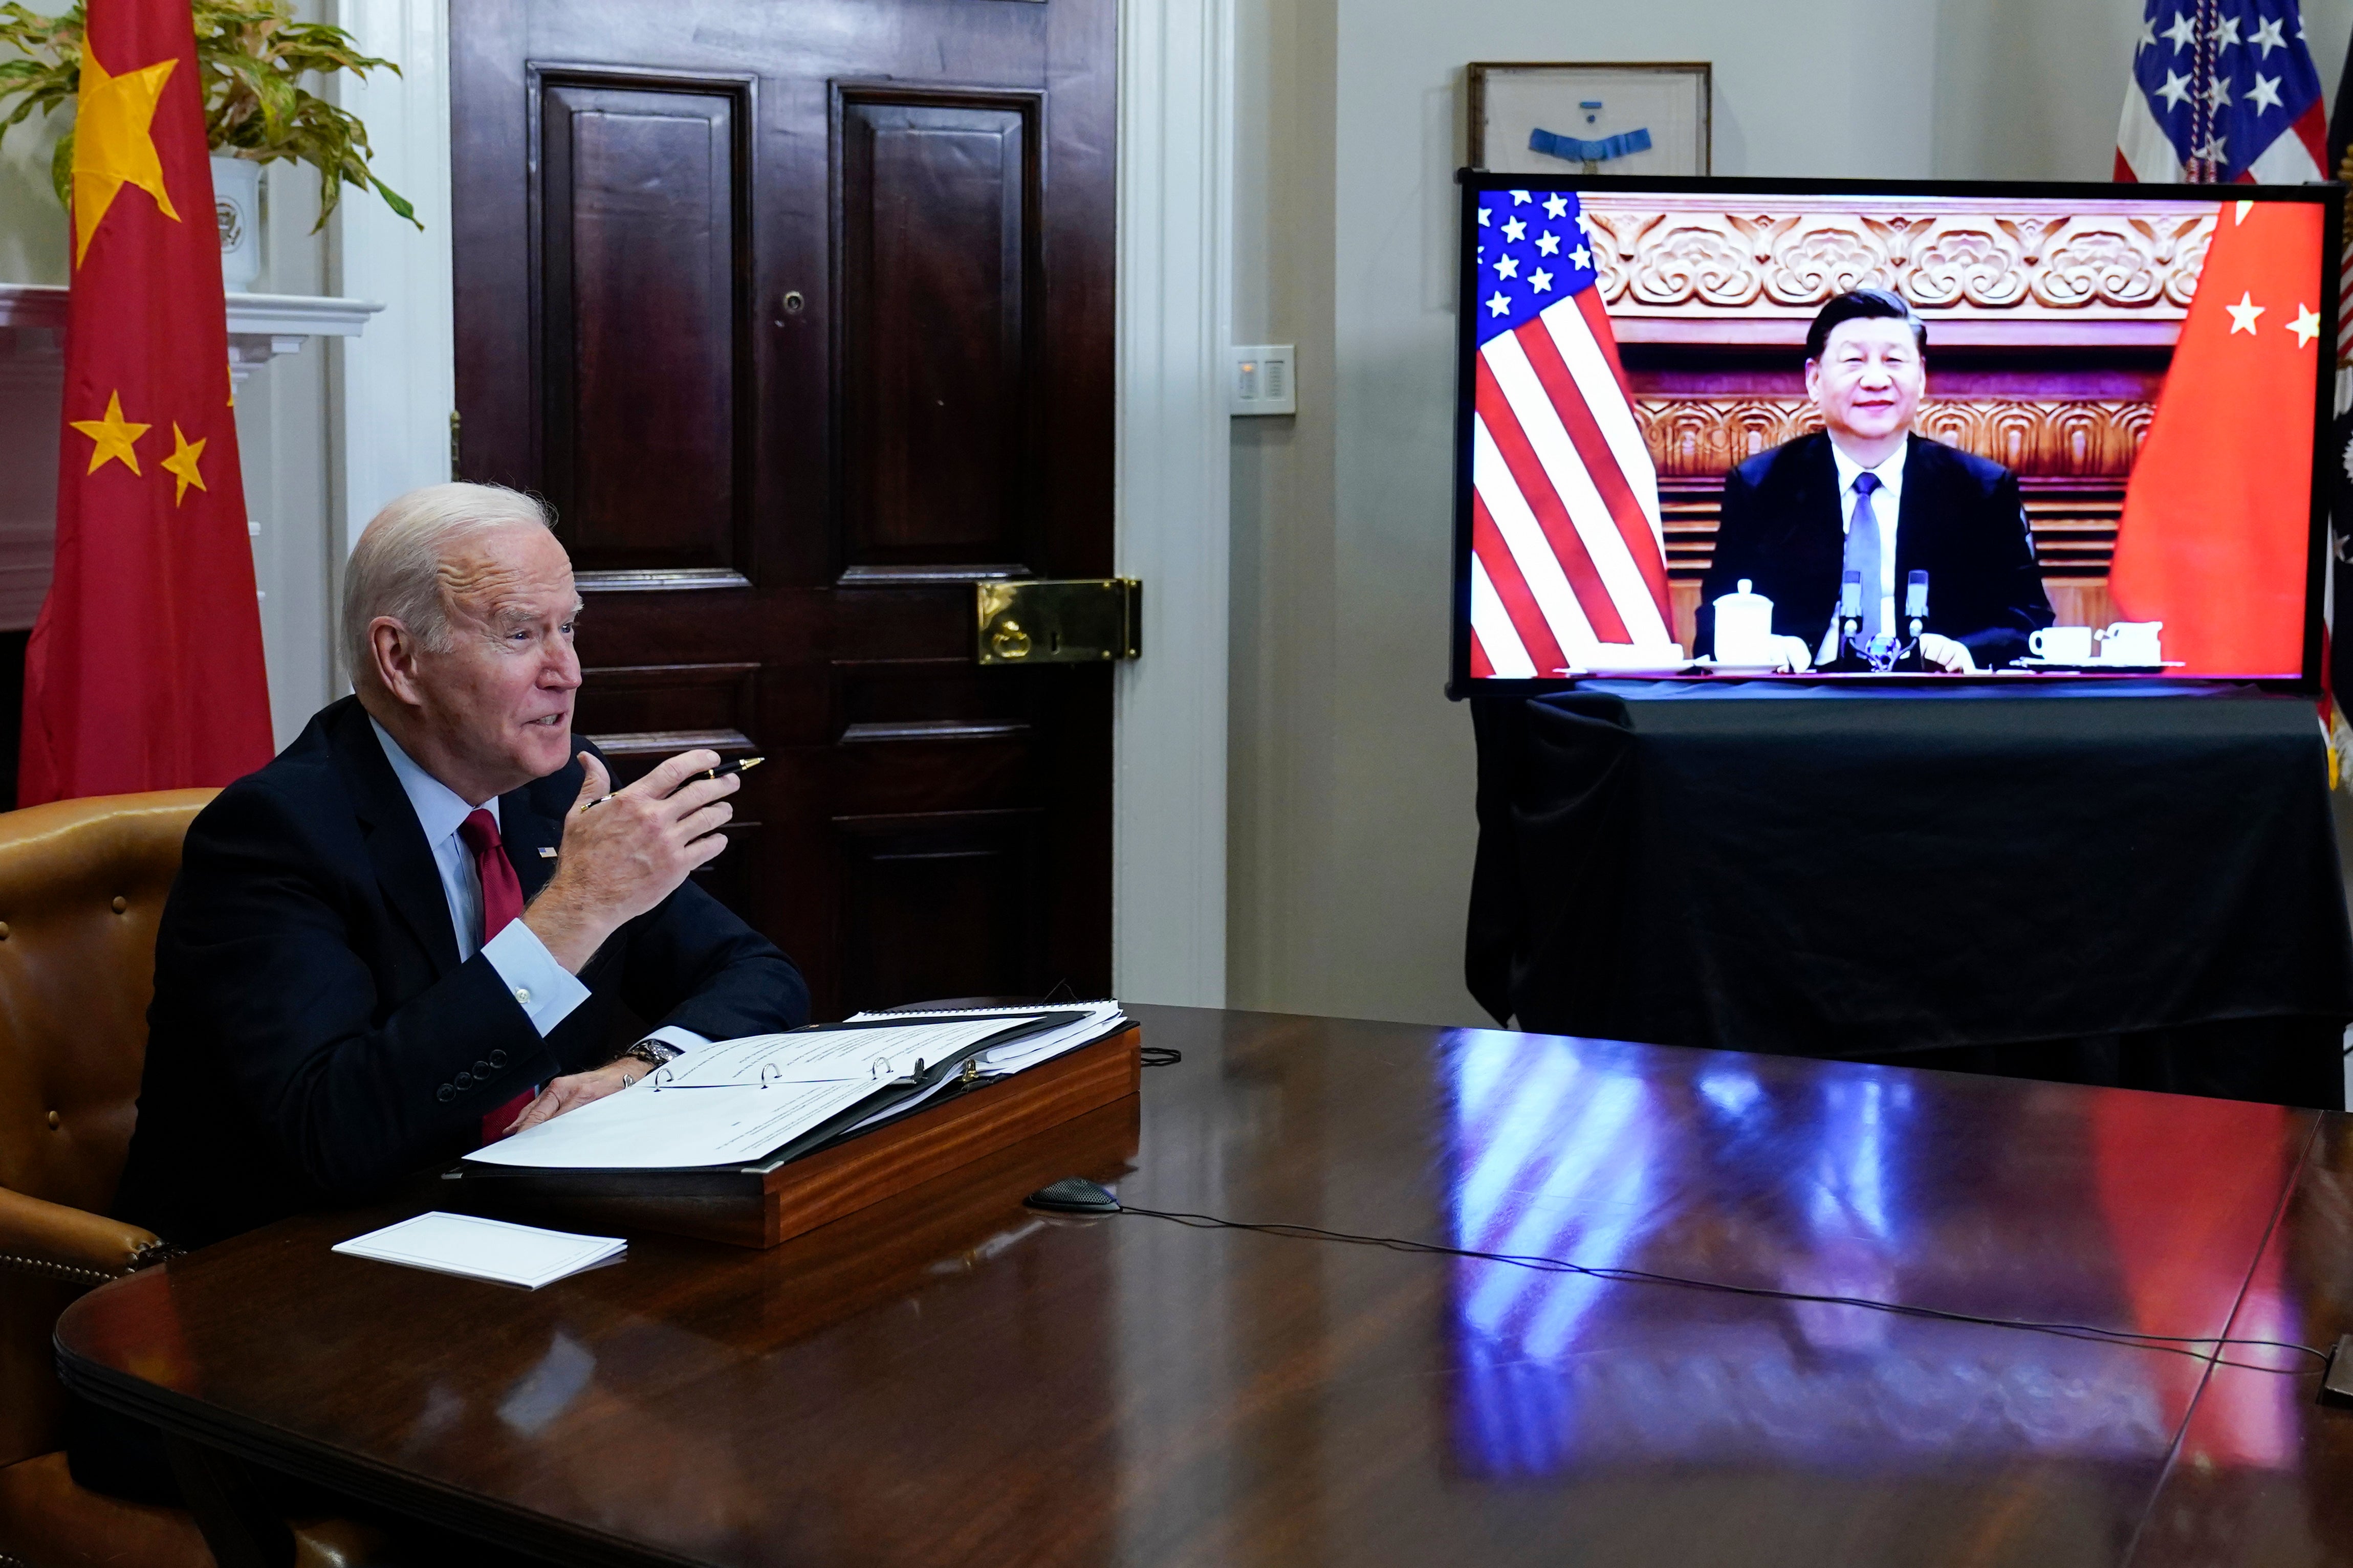 File photo: US president Joe Biden meets virtually with Chinese president Xi Jinping from the Roosevelt Room of the White House in Washington, 15 November 2021